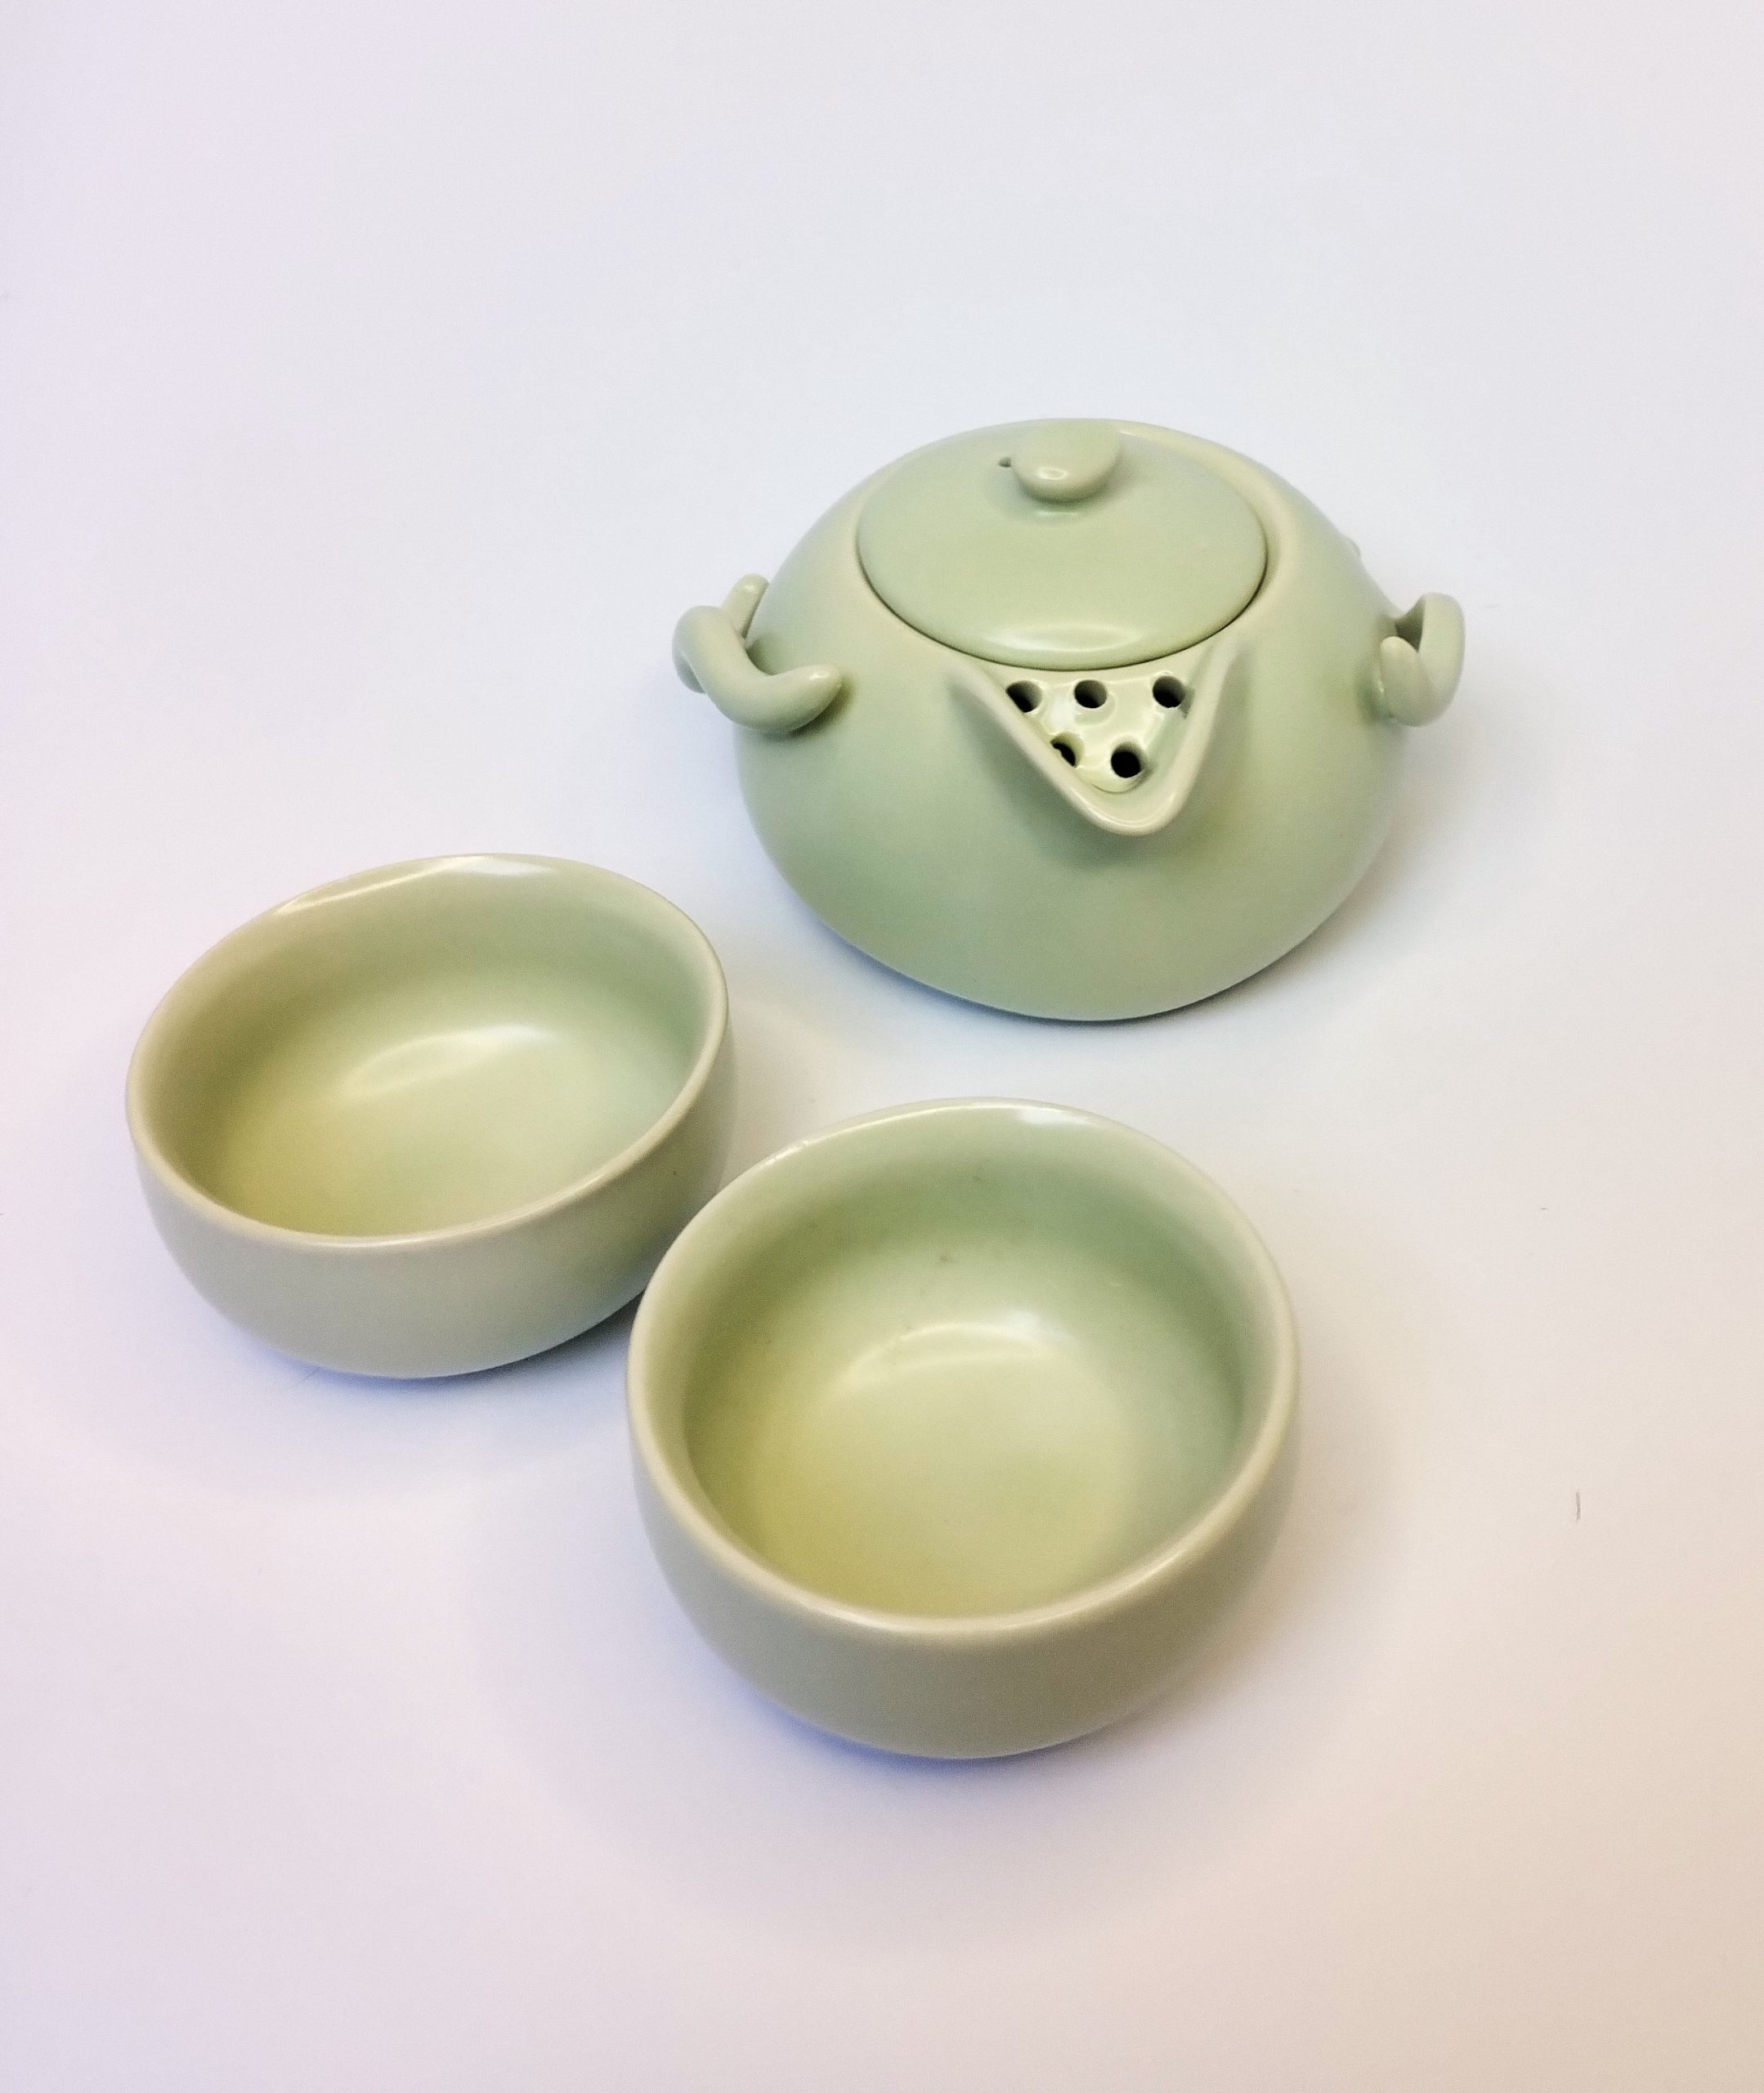 Traditionele Chinese Thee Set Mintgroen